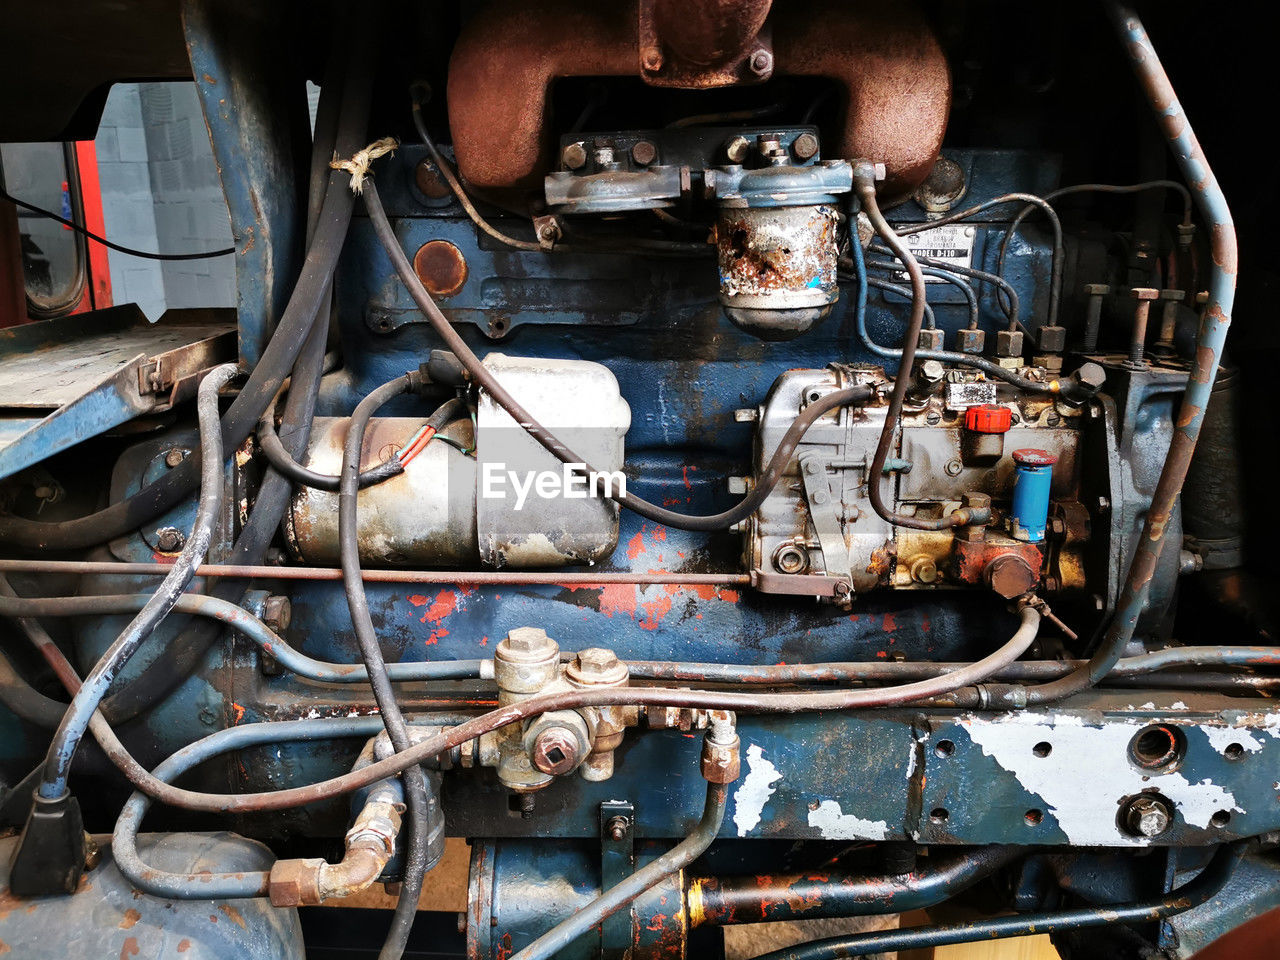 metal, vehicle, engine, car, no people, mode of transportation, transportation, technology, indoors, complexity, machinery, close-up, auto part, motor vehicle, equipment, industry, rusty